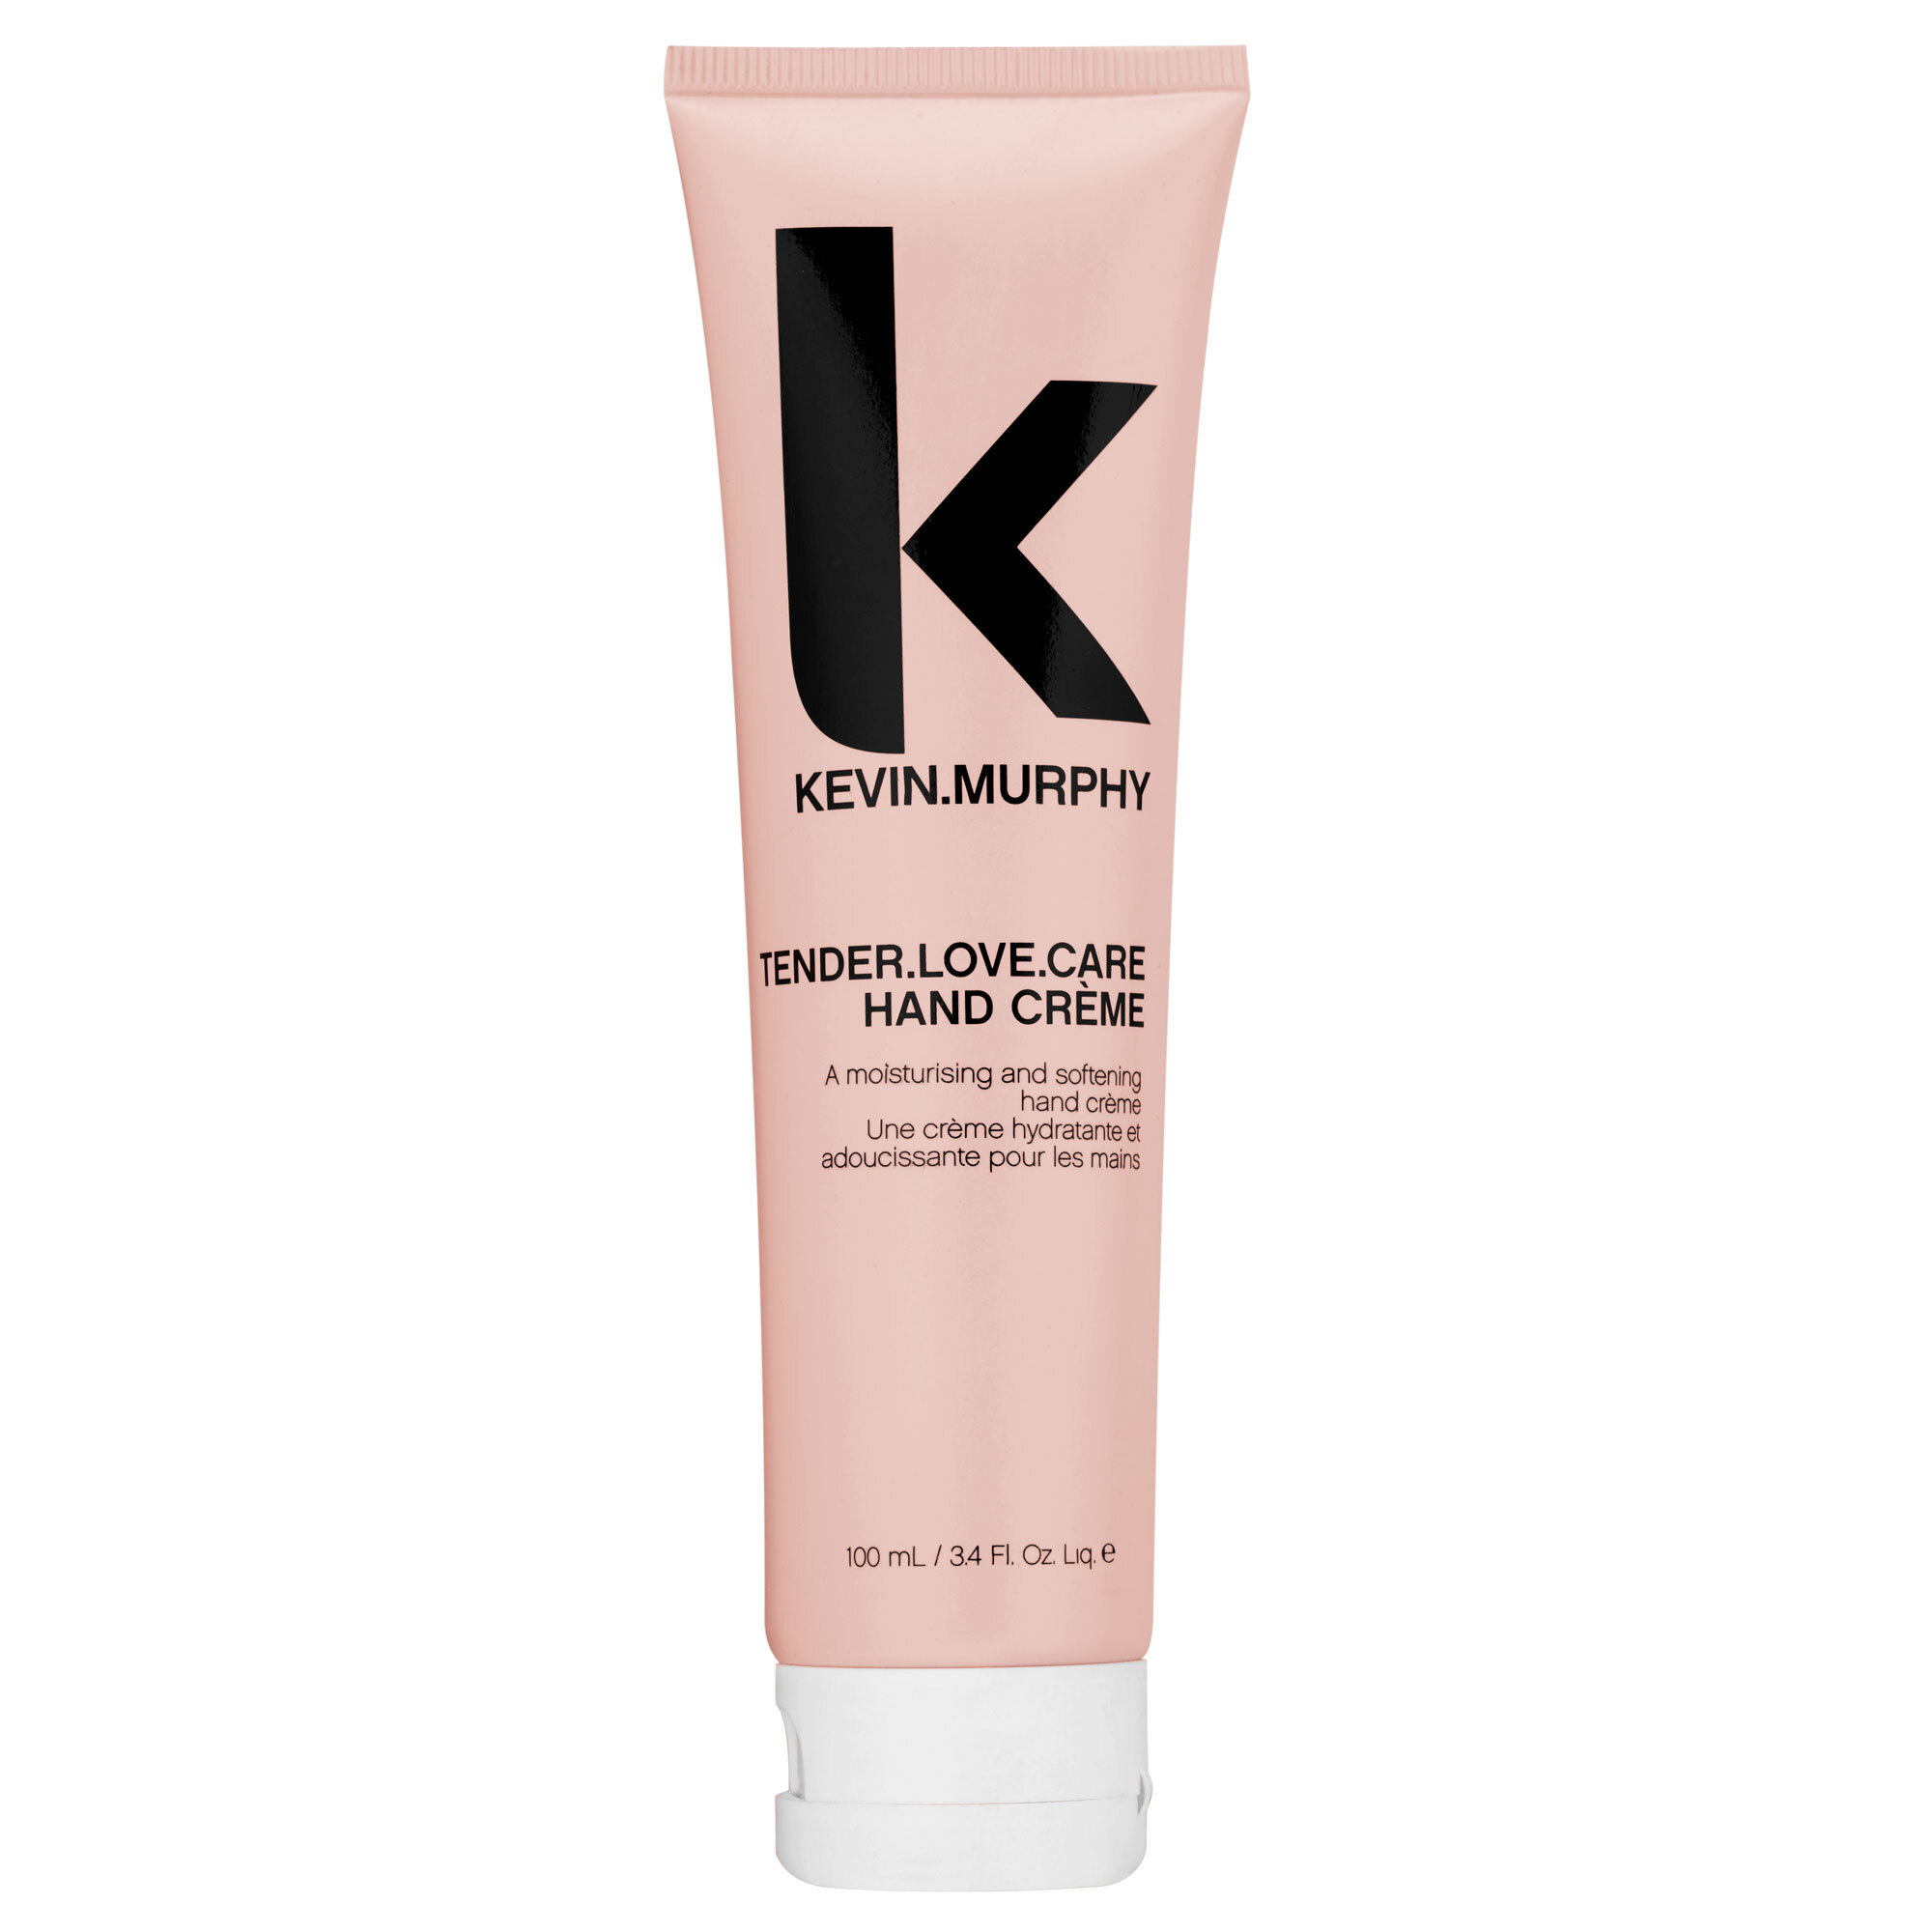 KEVIN.MURPHY TENDER.LOVE.CARE Hand Creme